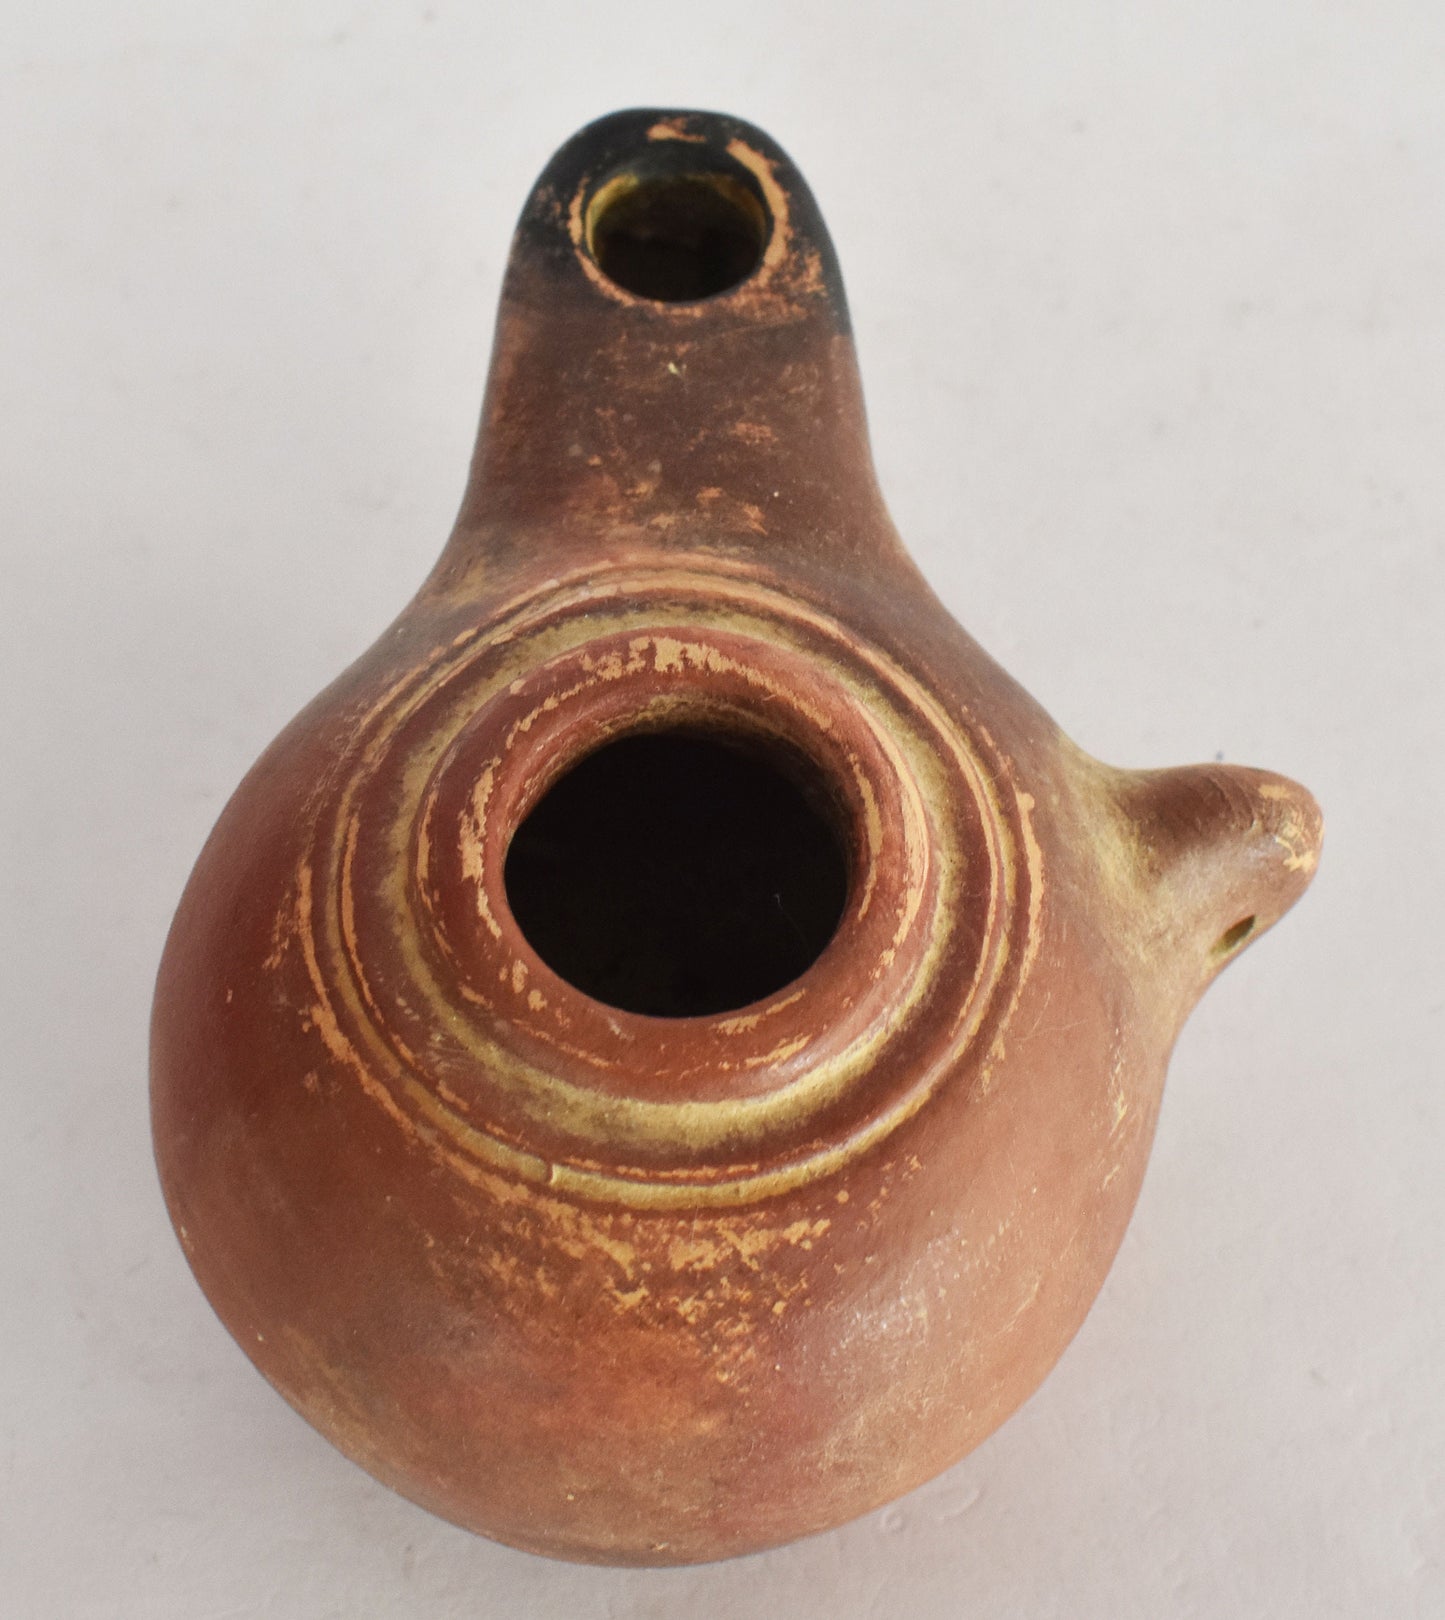 Oil Lamp - Athens - 600 BC - Elongated Nozzle,Incised Band around the Center, a Pinched 'Ear' - Museum Reproduction - Ceramic Artifact